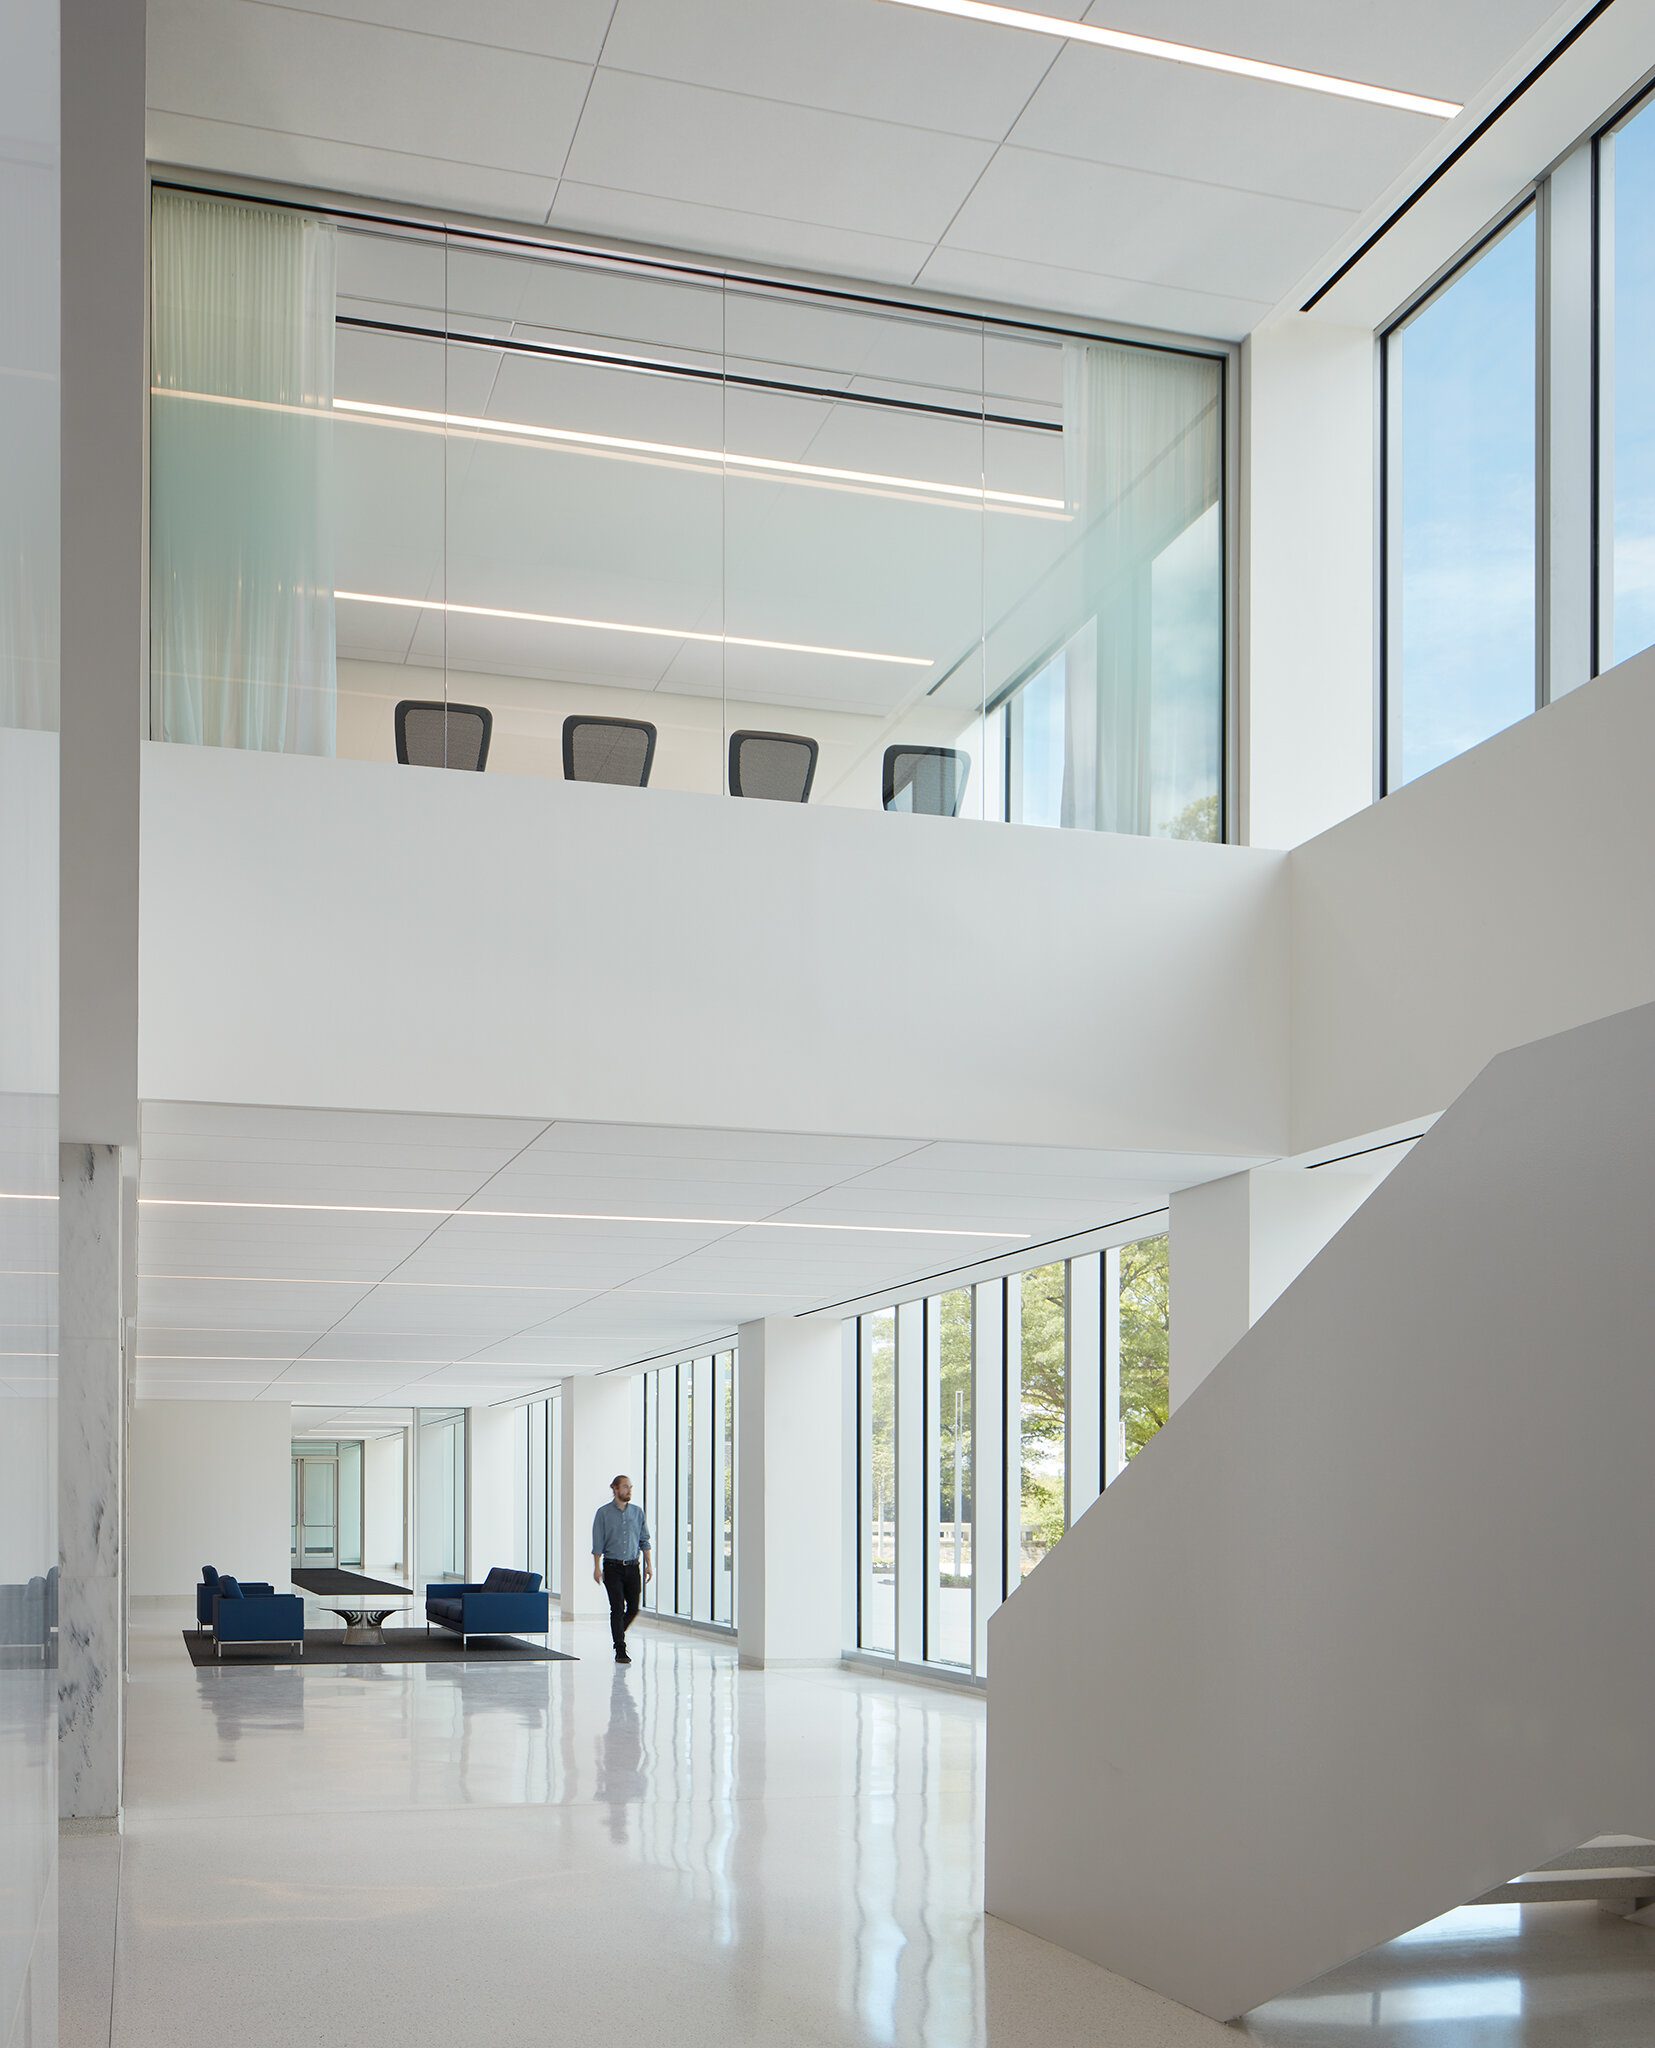  AWARDS  AIA Minnesota, Honor Award, 2021    Altmeyer Building, Social Security Headquarters - Baltimore  HGA / Snow Kreilich Architects  Woodlawn, MD     Return to Projects  